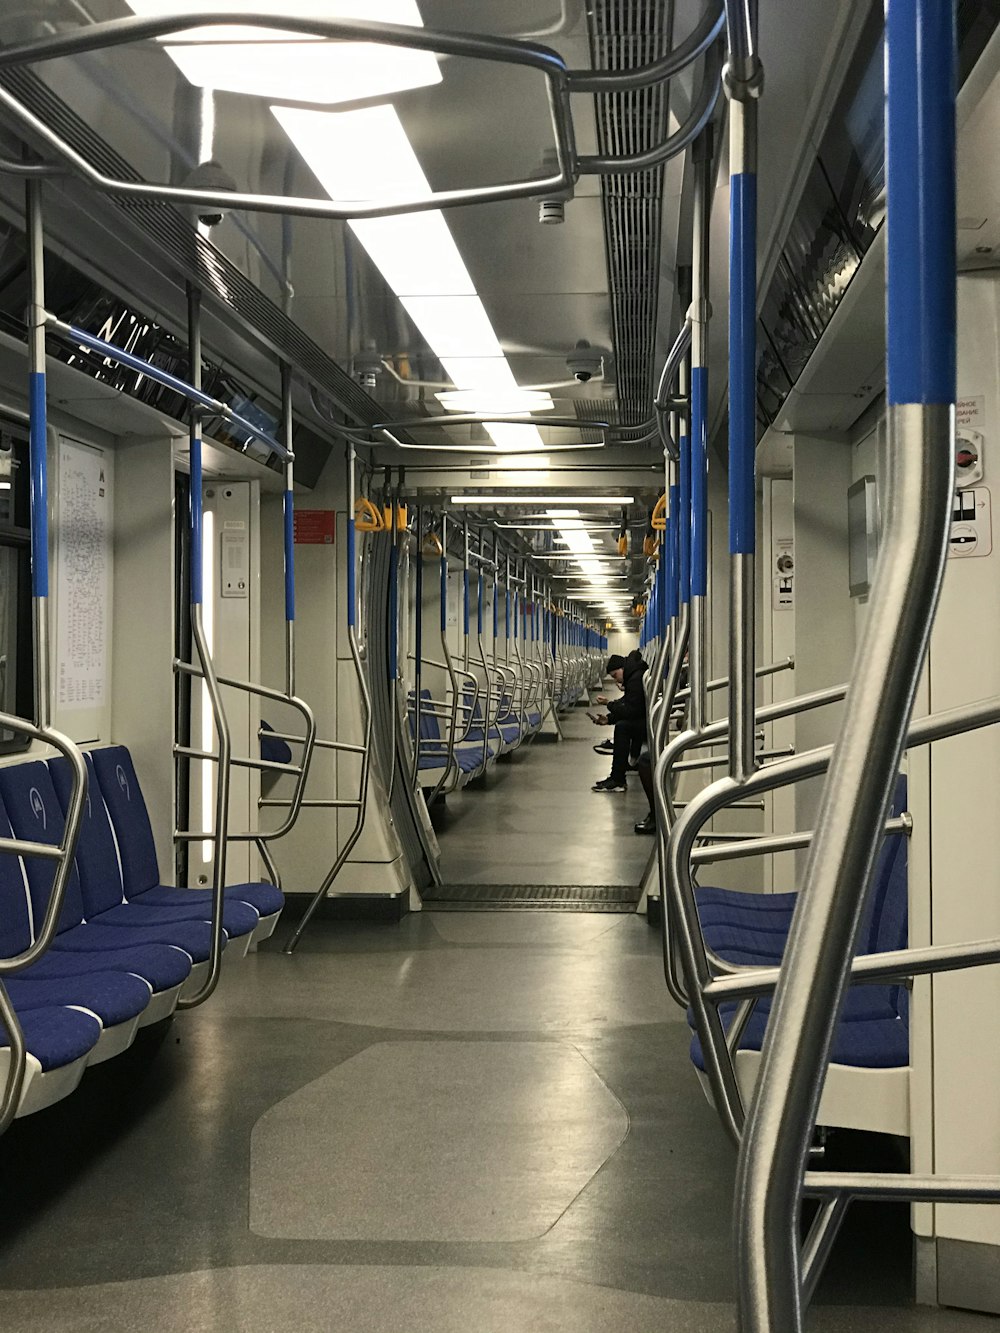 blue and white train seats